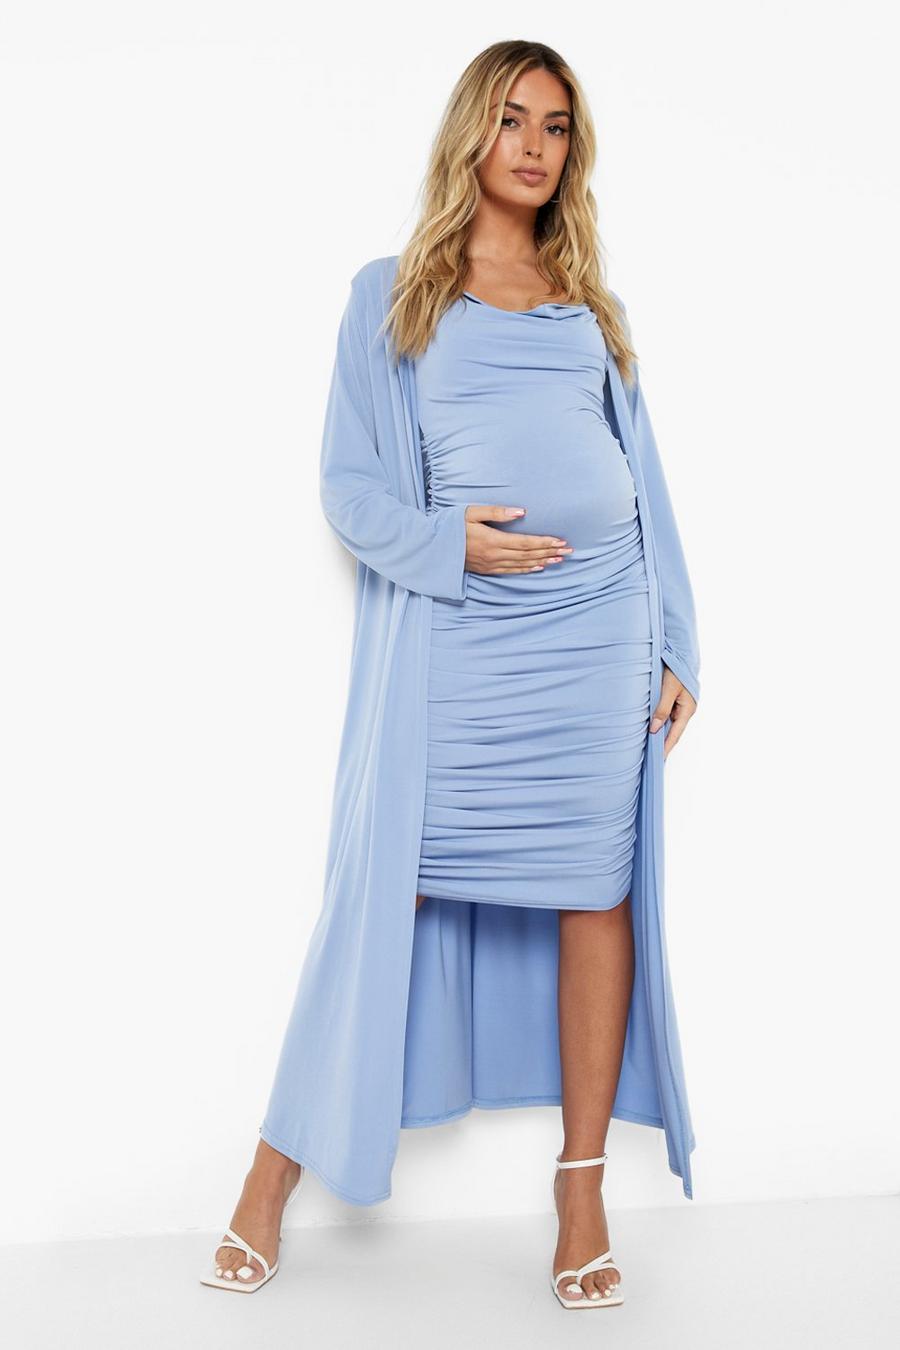 Blue bleu Maternity Strappy Cowl Neck Dress And Duster Coat